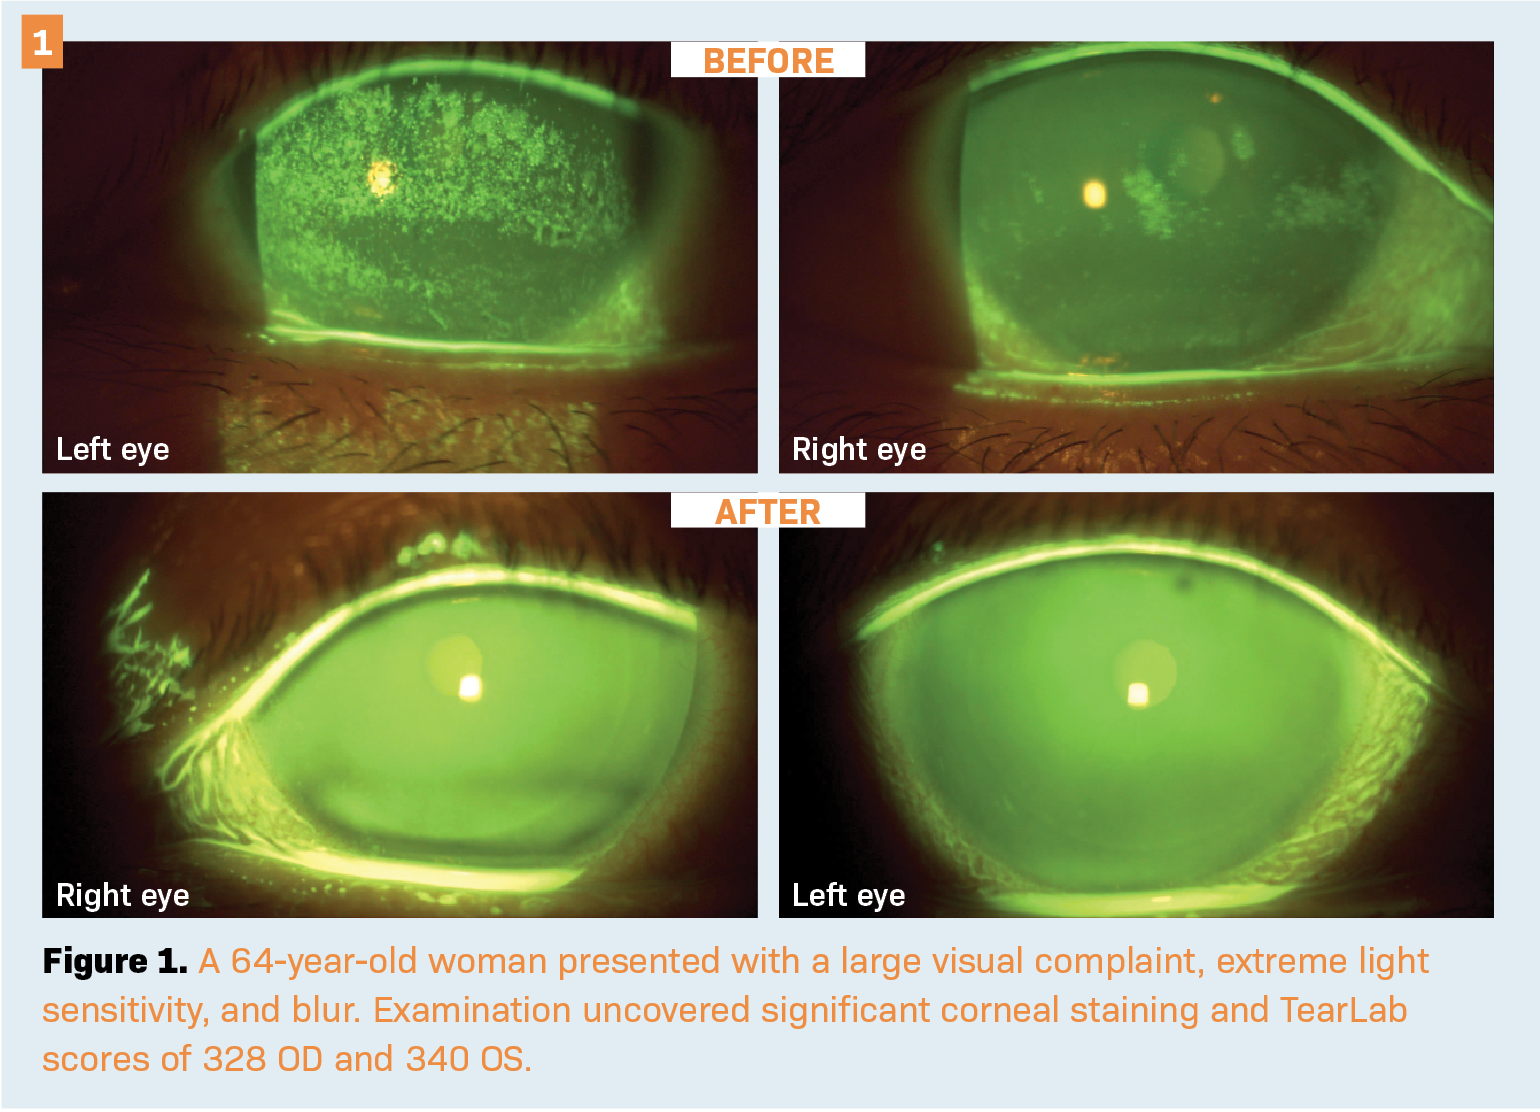 A 64-year-old woman presented with a large visual complaint, extreme light sensitivity, and blur. Examination uncovered significant corneal staining and TearLab scores of 328 OD and 340 OS. 